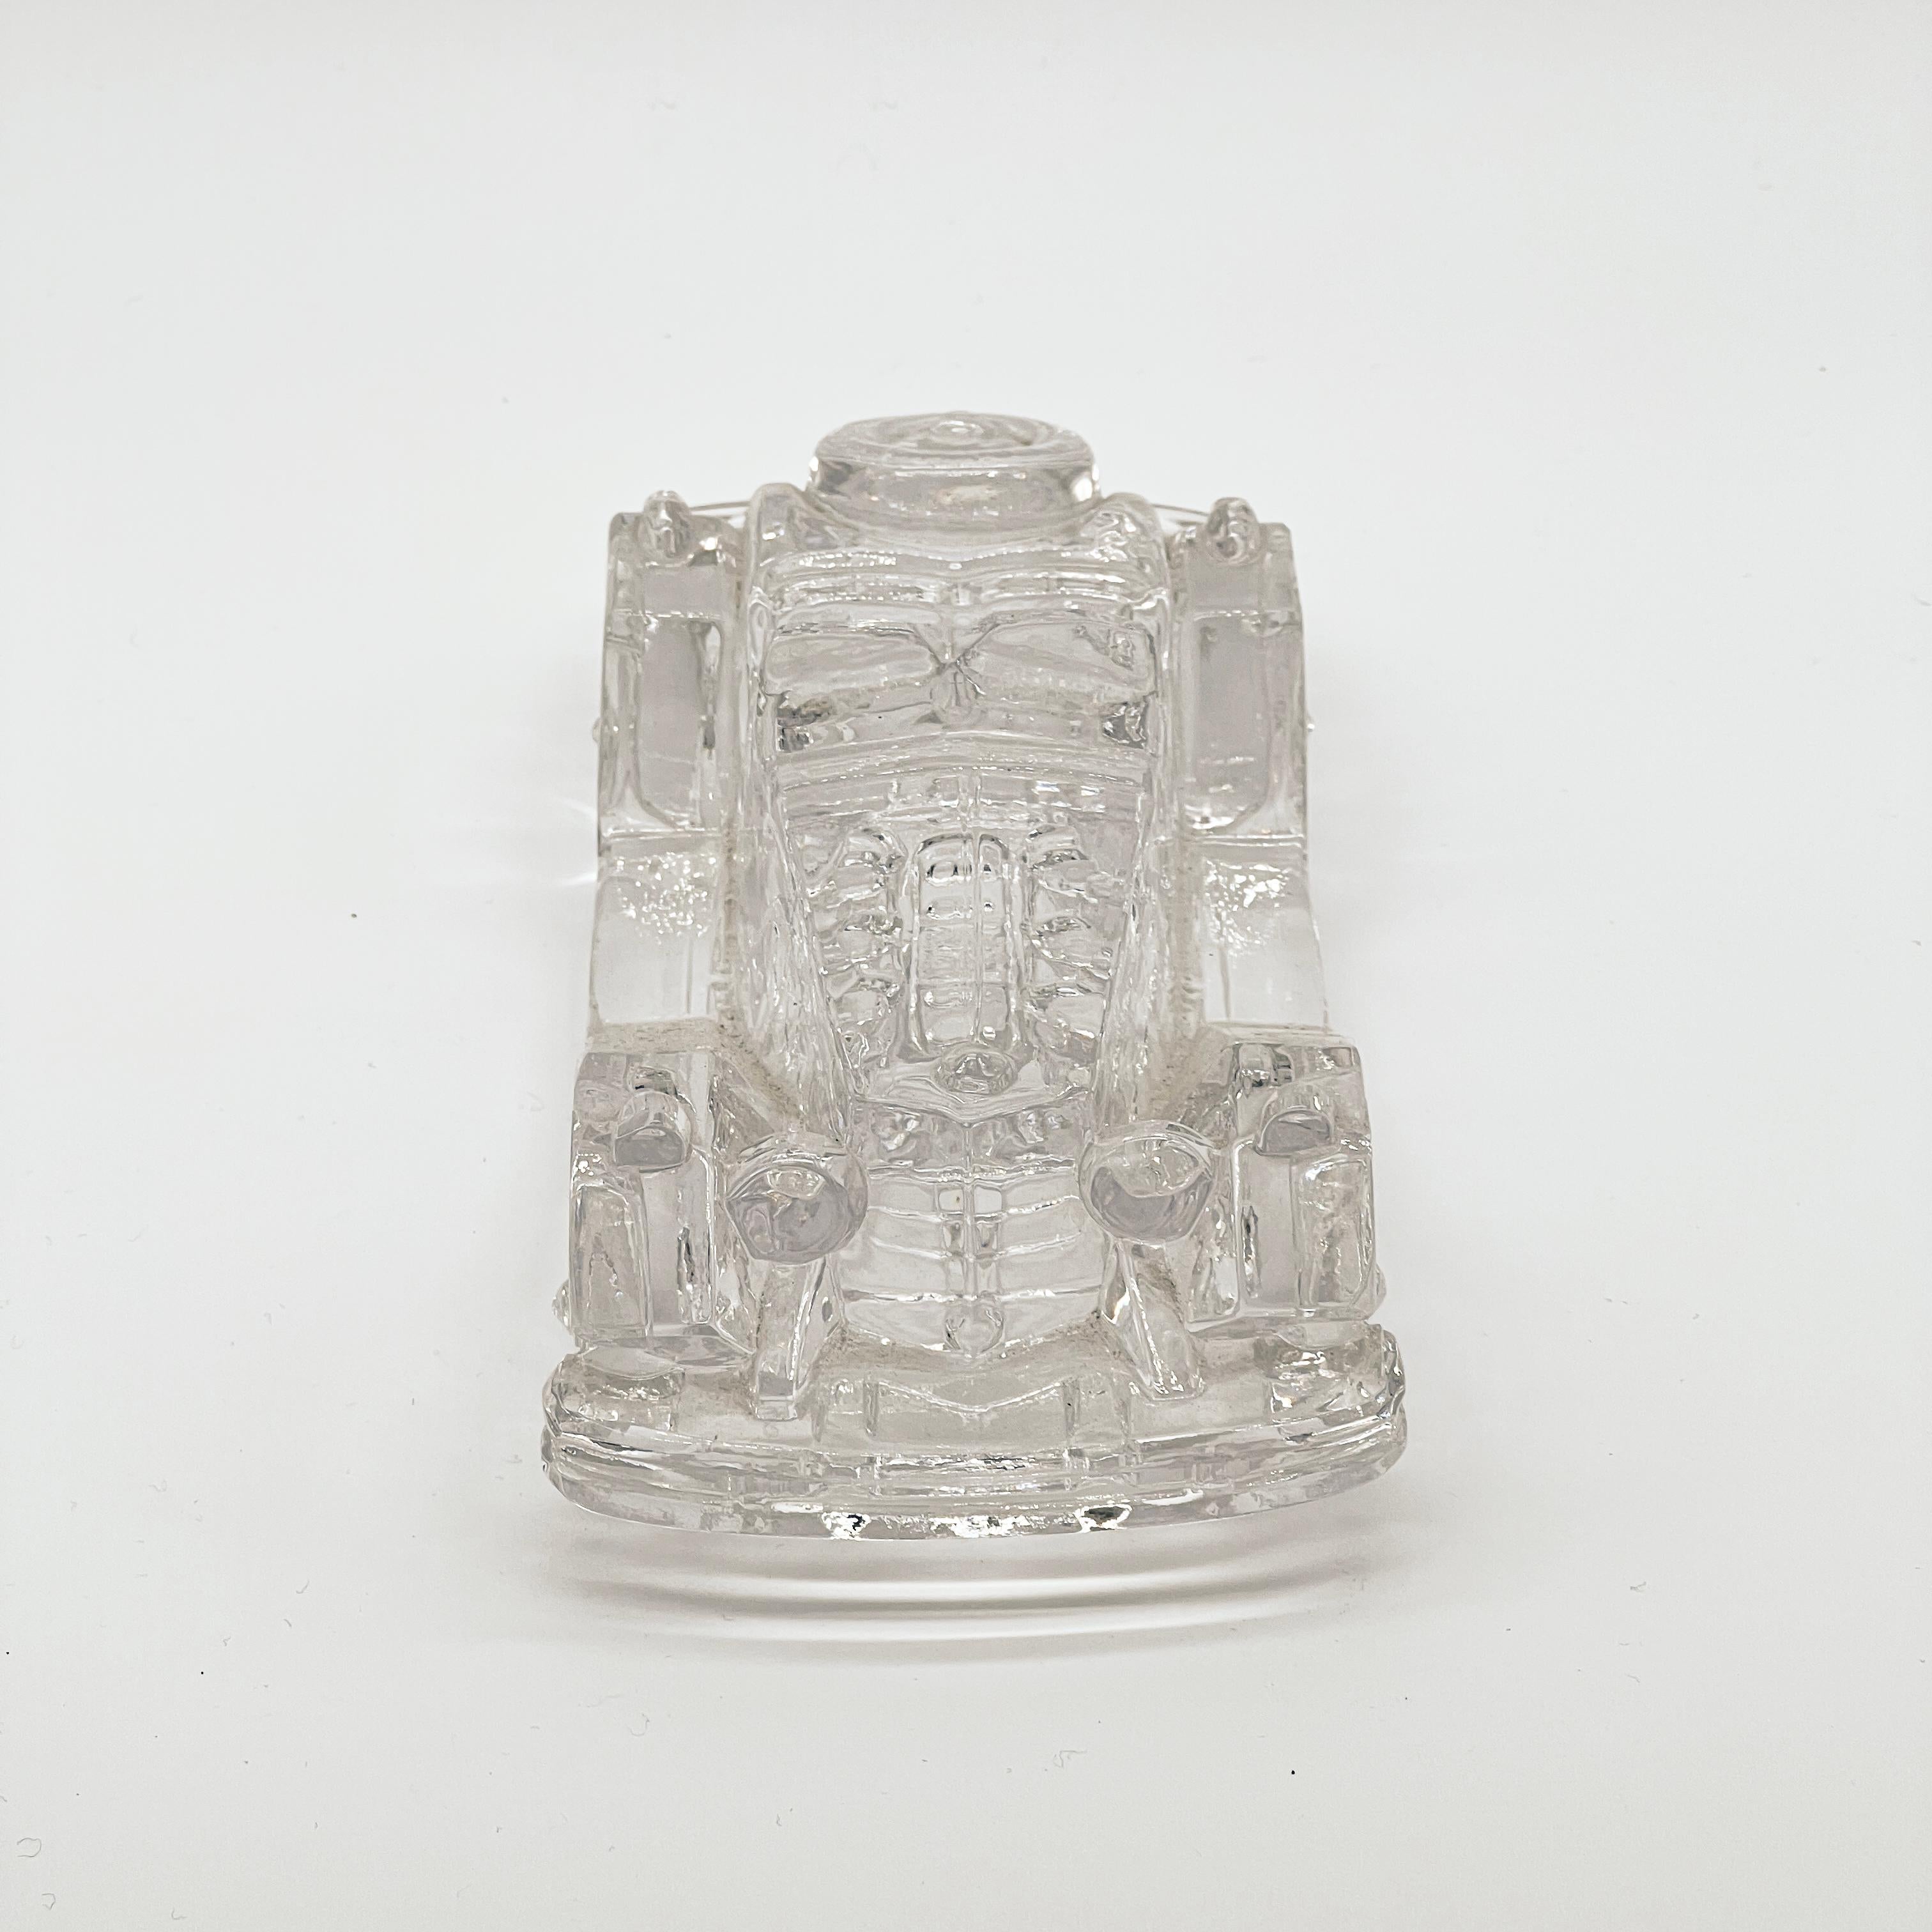 Italian Vintage Clear Crystal Mg Roadster Decorative Model Car / Paperweight